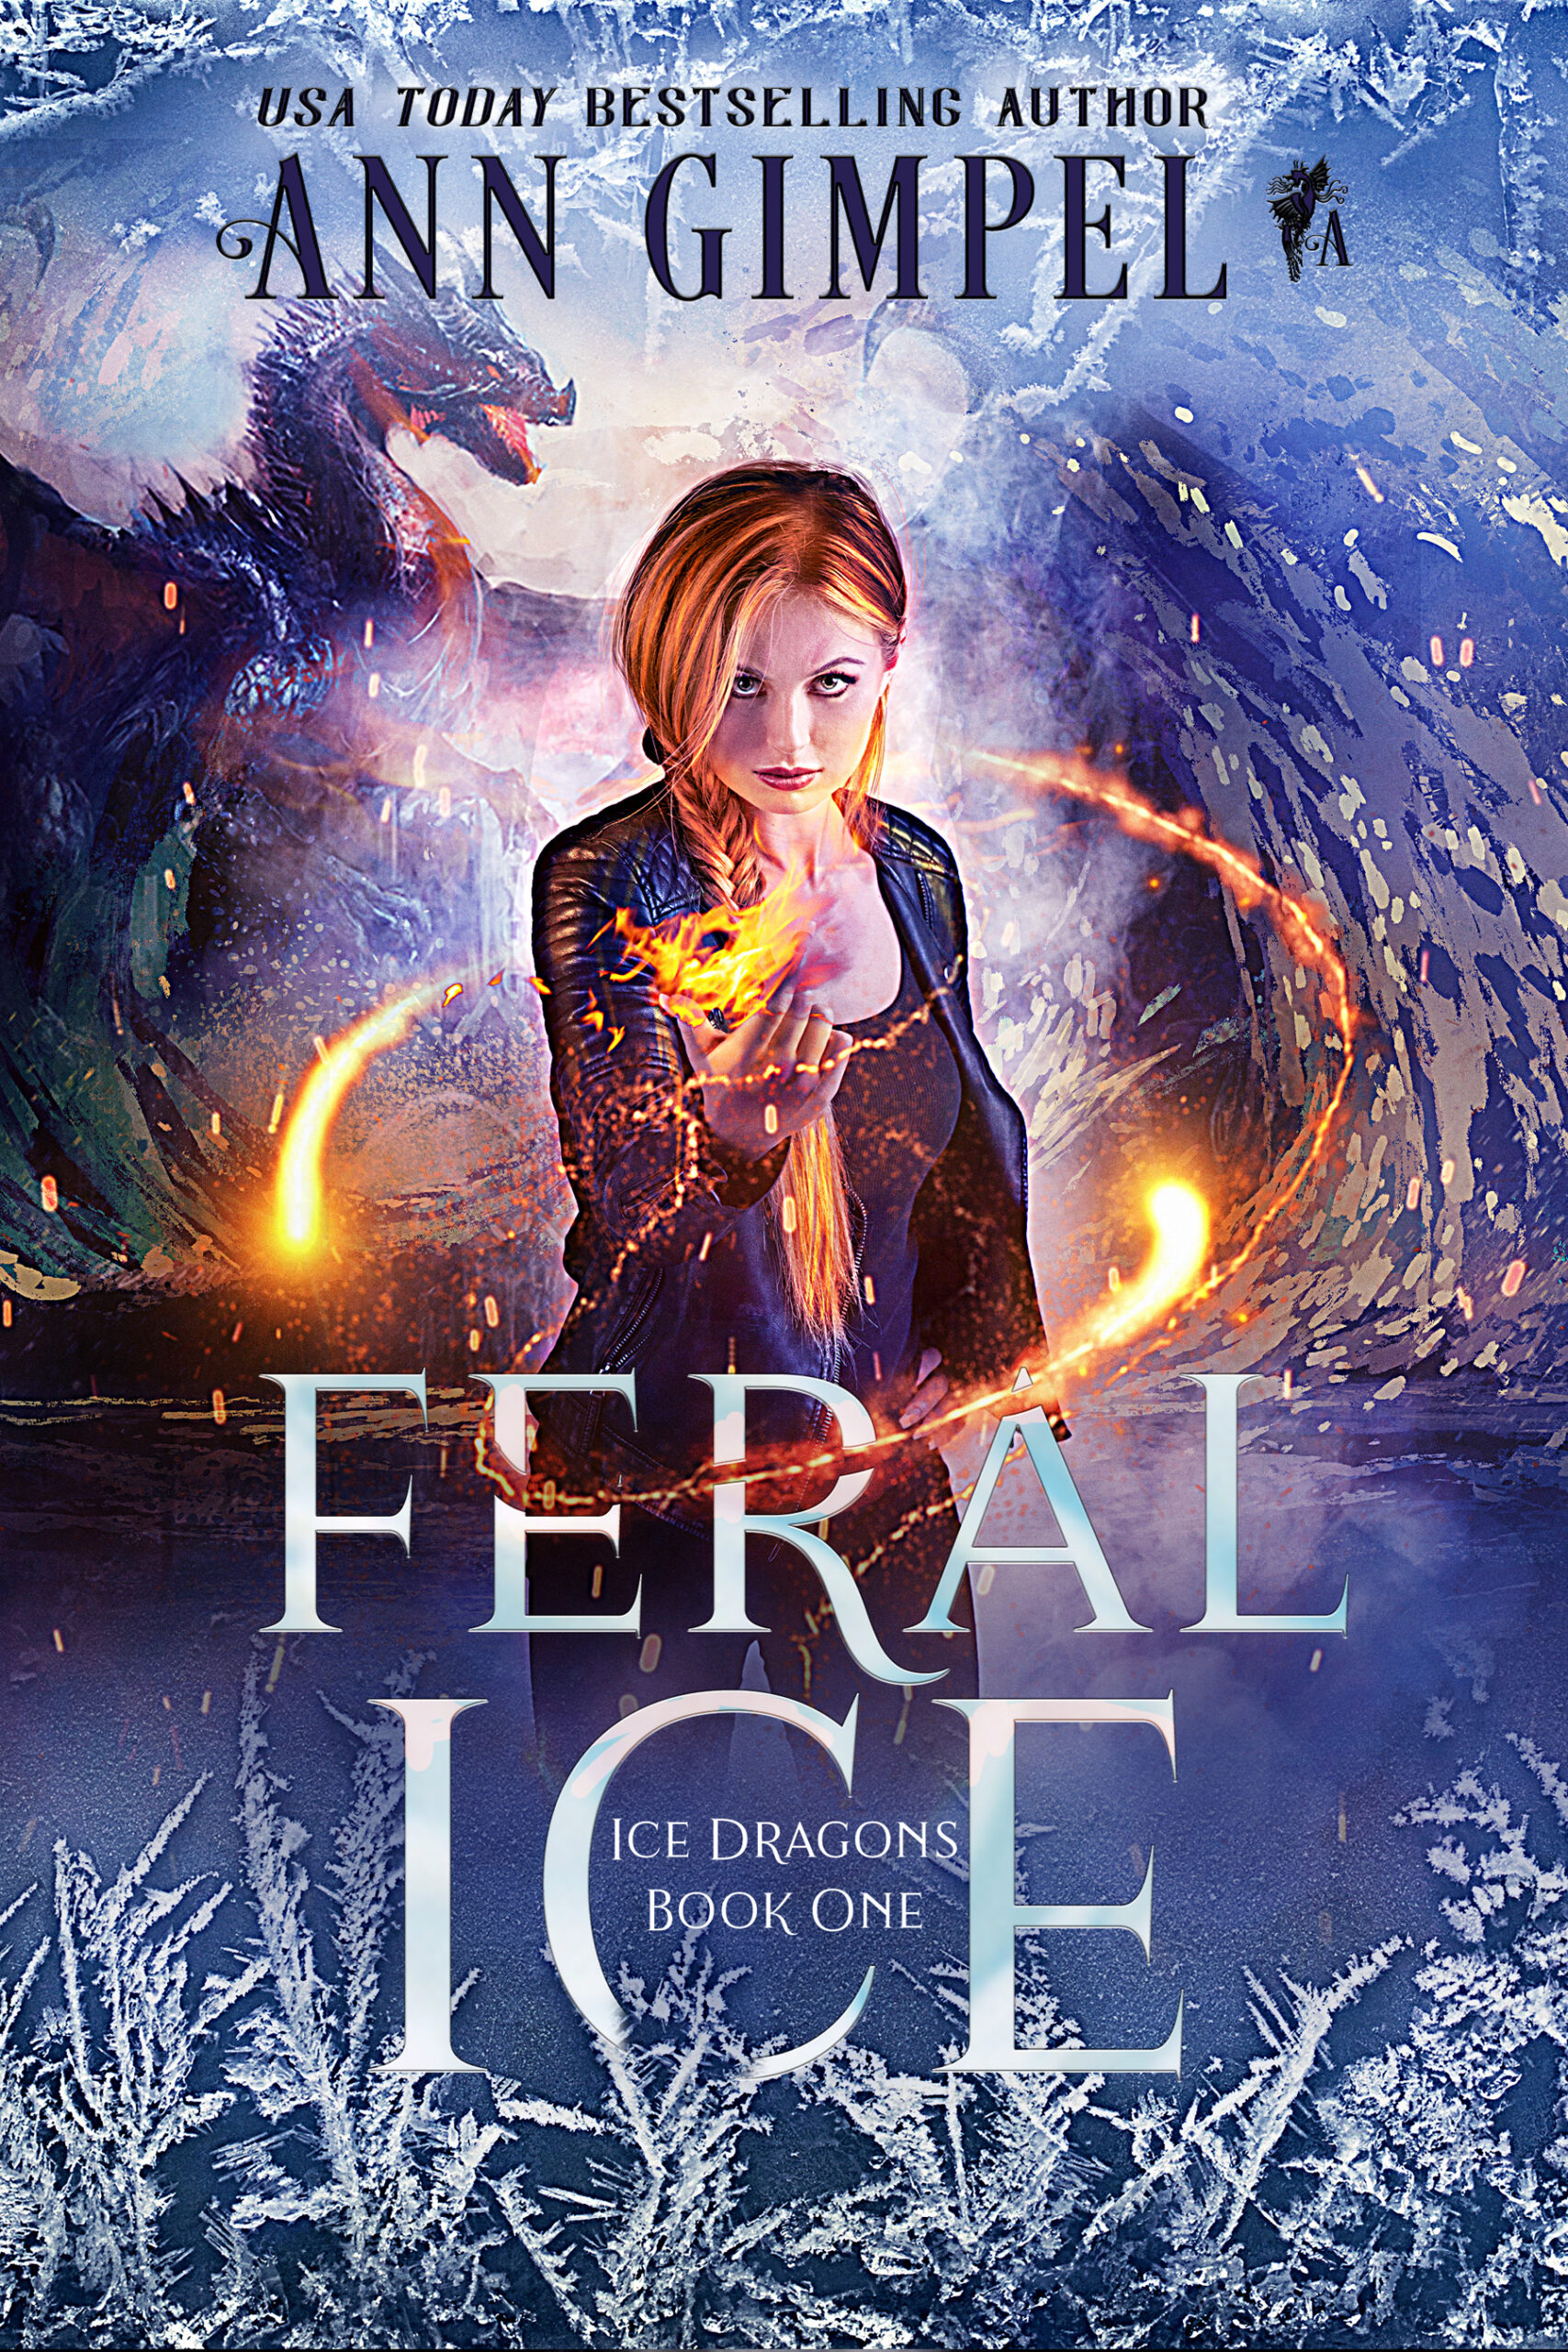 Feral Ice, Ice Dragons Book One